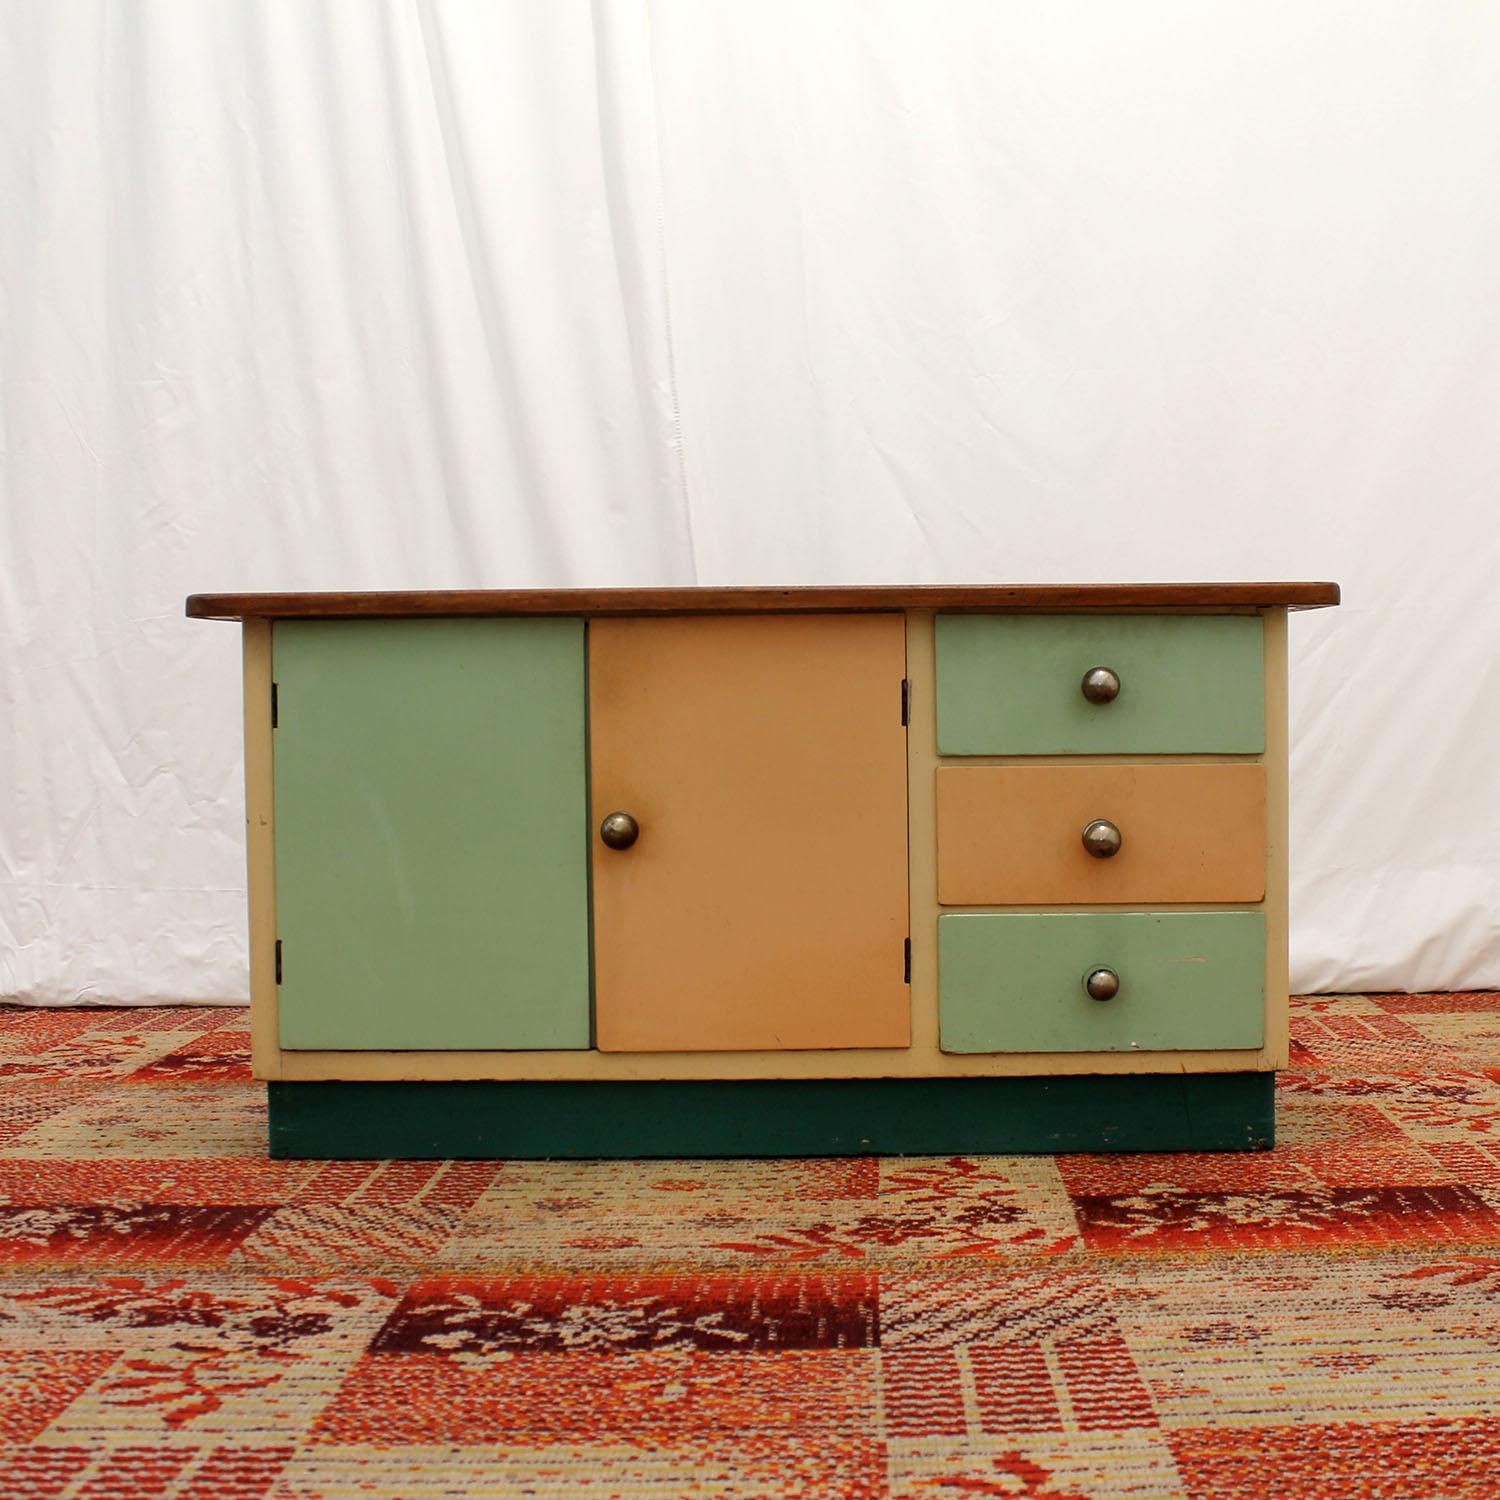 Midcentury chest of drawers, it was made in Czechoslovakia in the 1950s. Made of solid wood, it has chrome handles, laminate surface on the top, colored lacquered doors. The cabinet is in good preserved Vintage condition with nice patina, showing